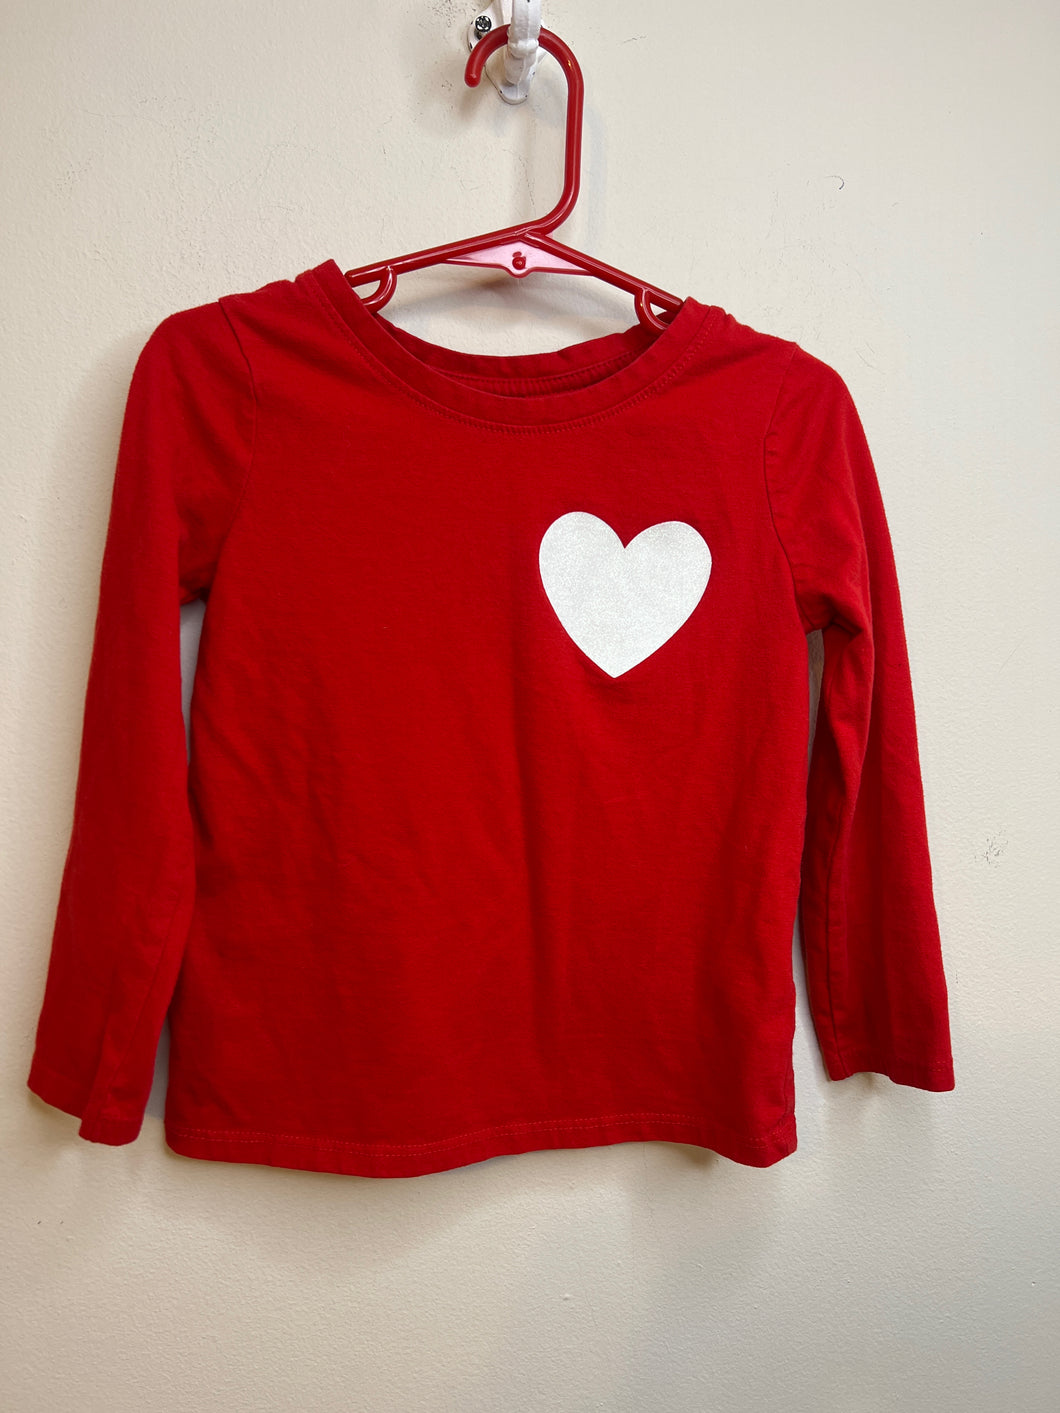 Girls size 4T Cat & Jack Red long-sleeve  Shirt with a heart